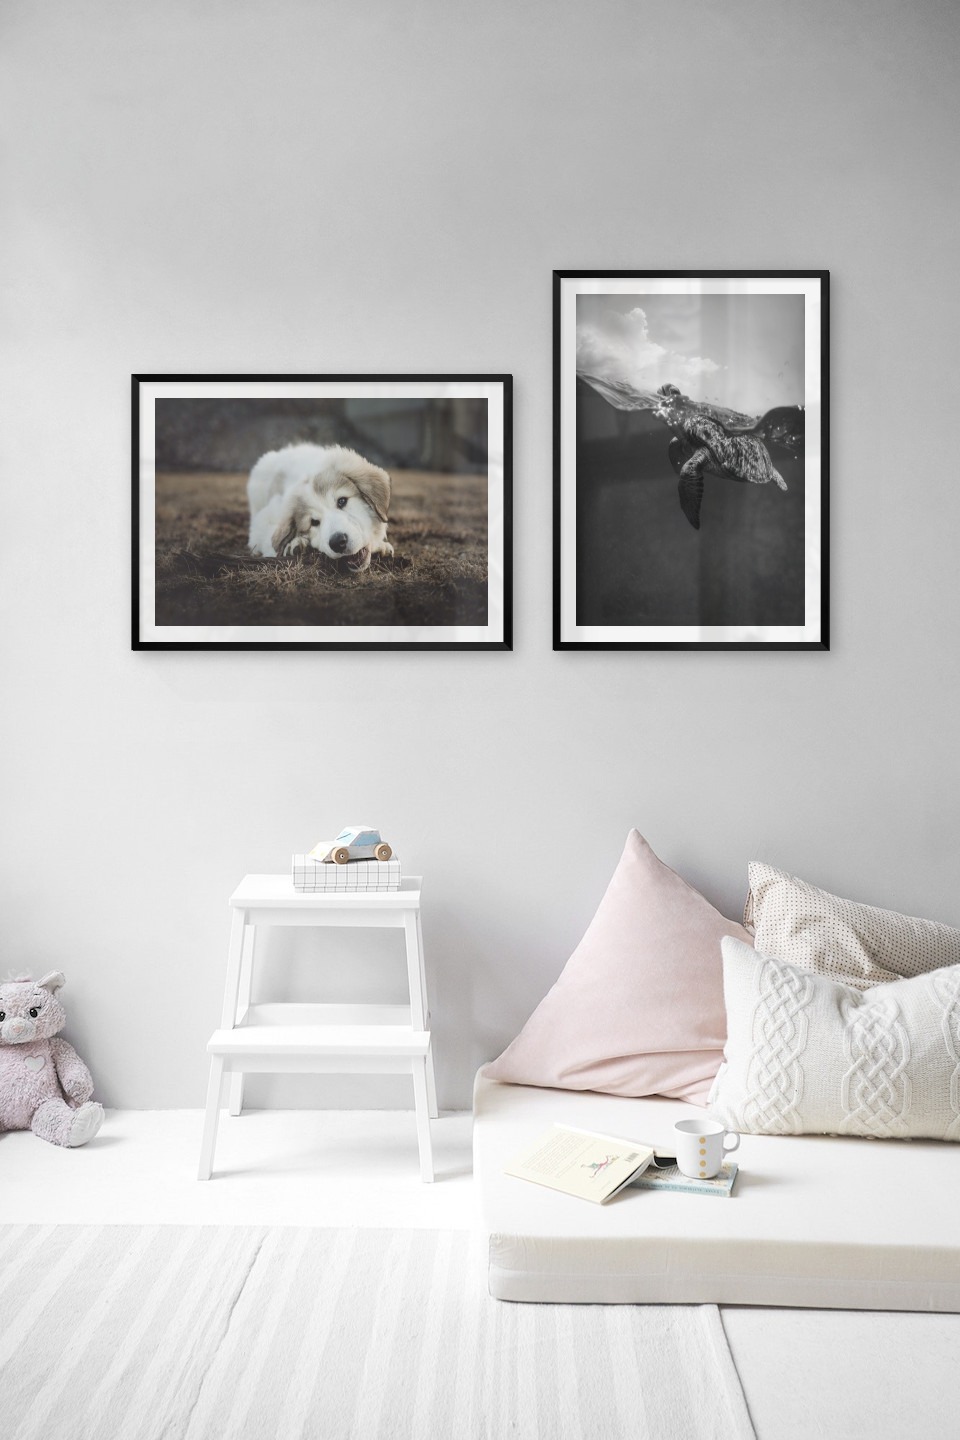 Gallery wall with picture frames in black in sizes 50x70 with prints "Dog chewing" and "Turtle"